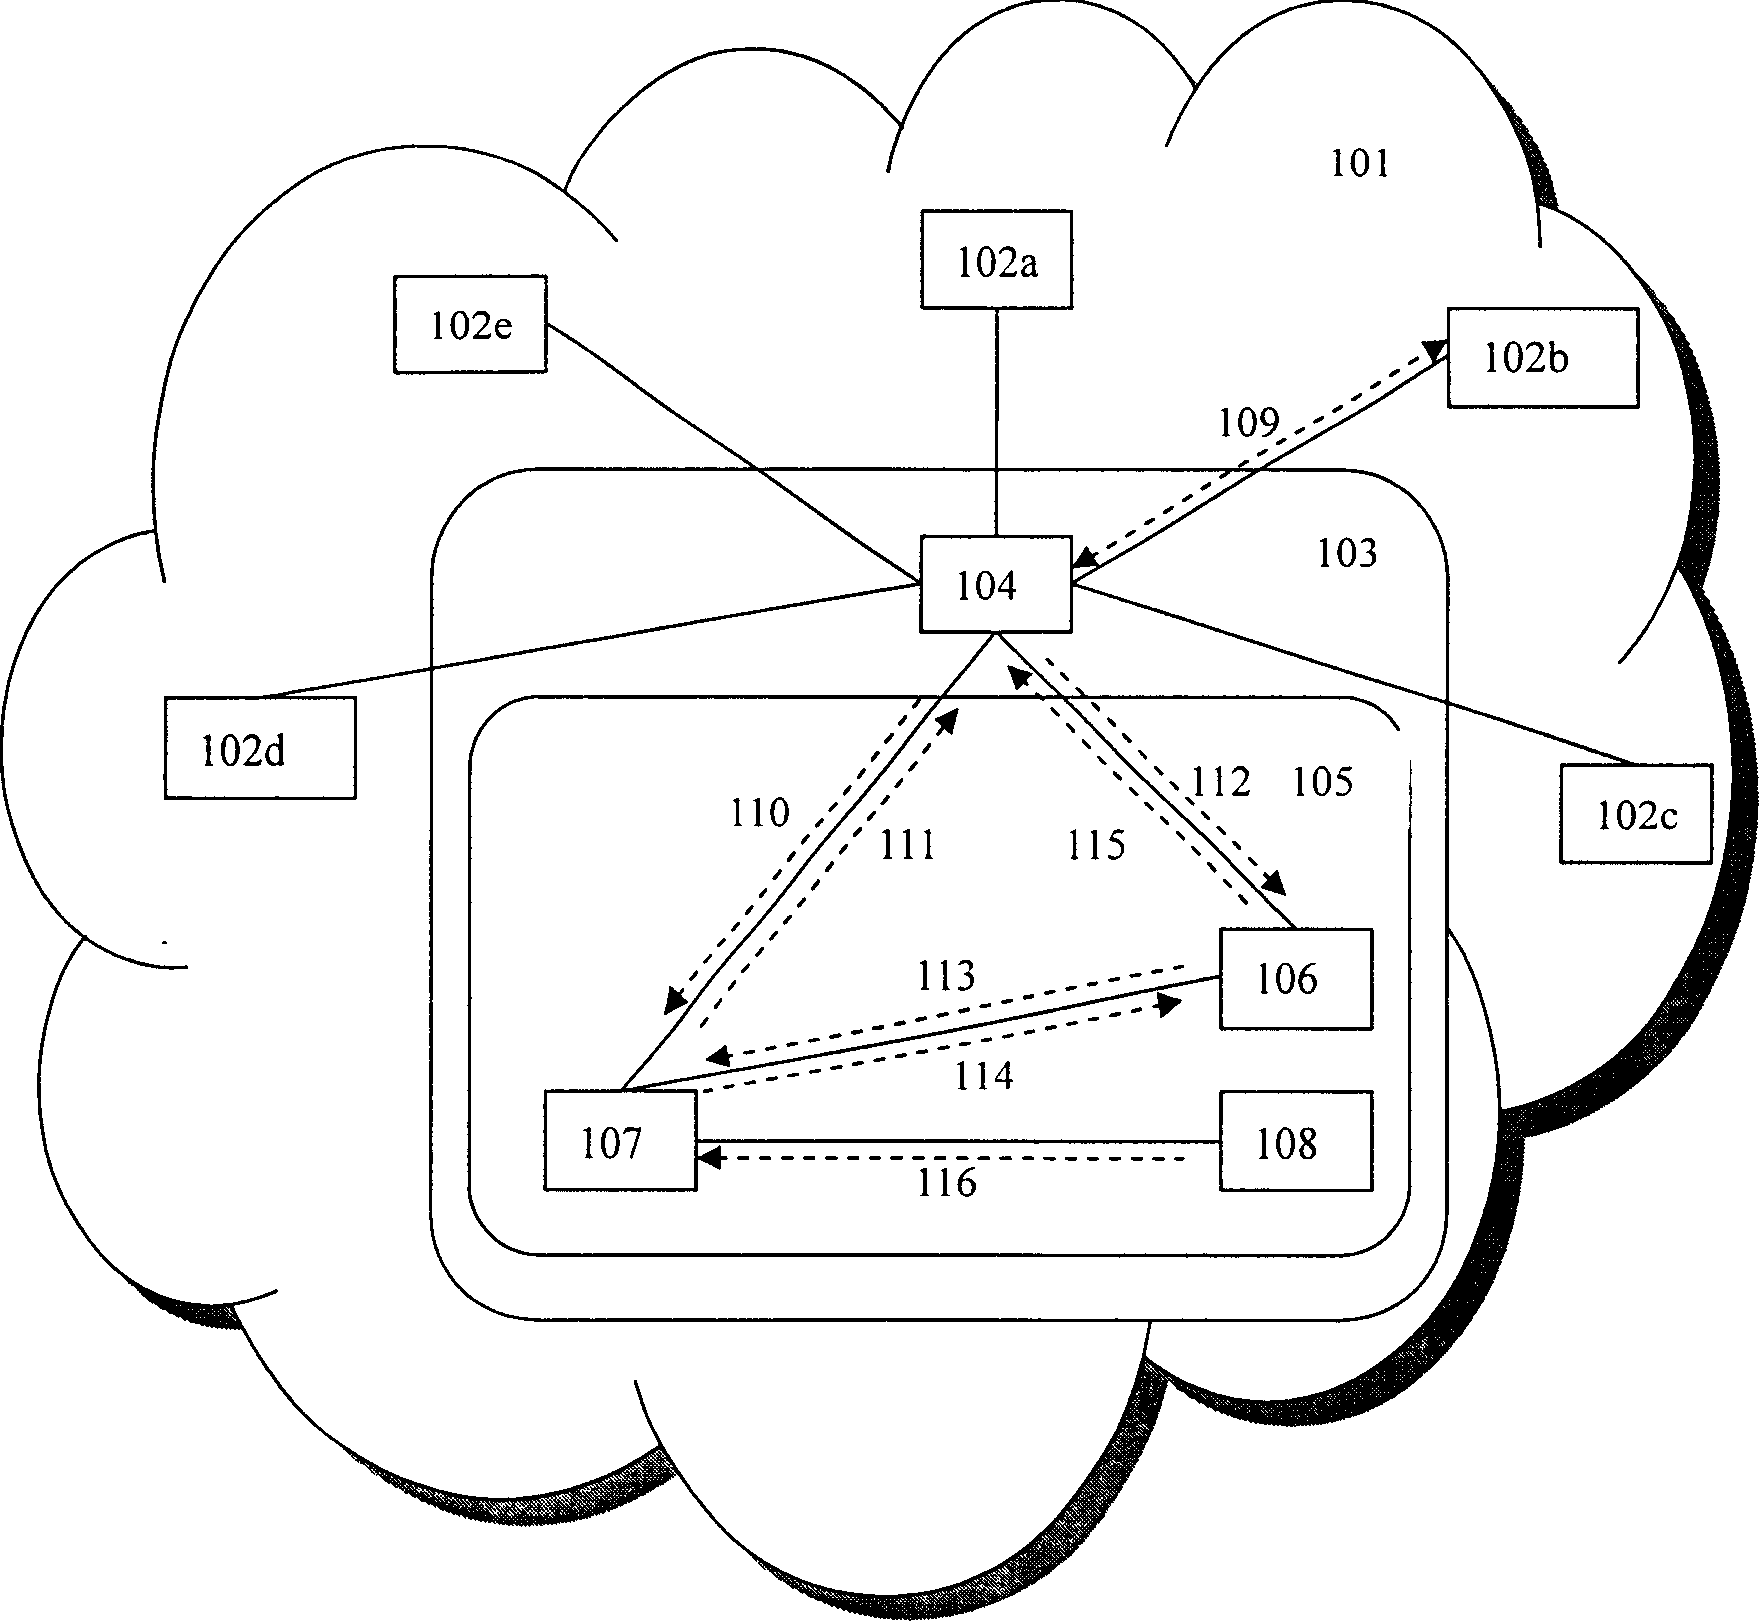 Software service generation method according to user requirements in network environment